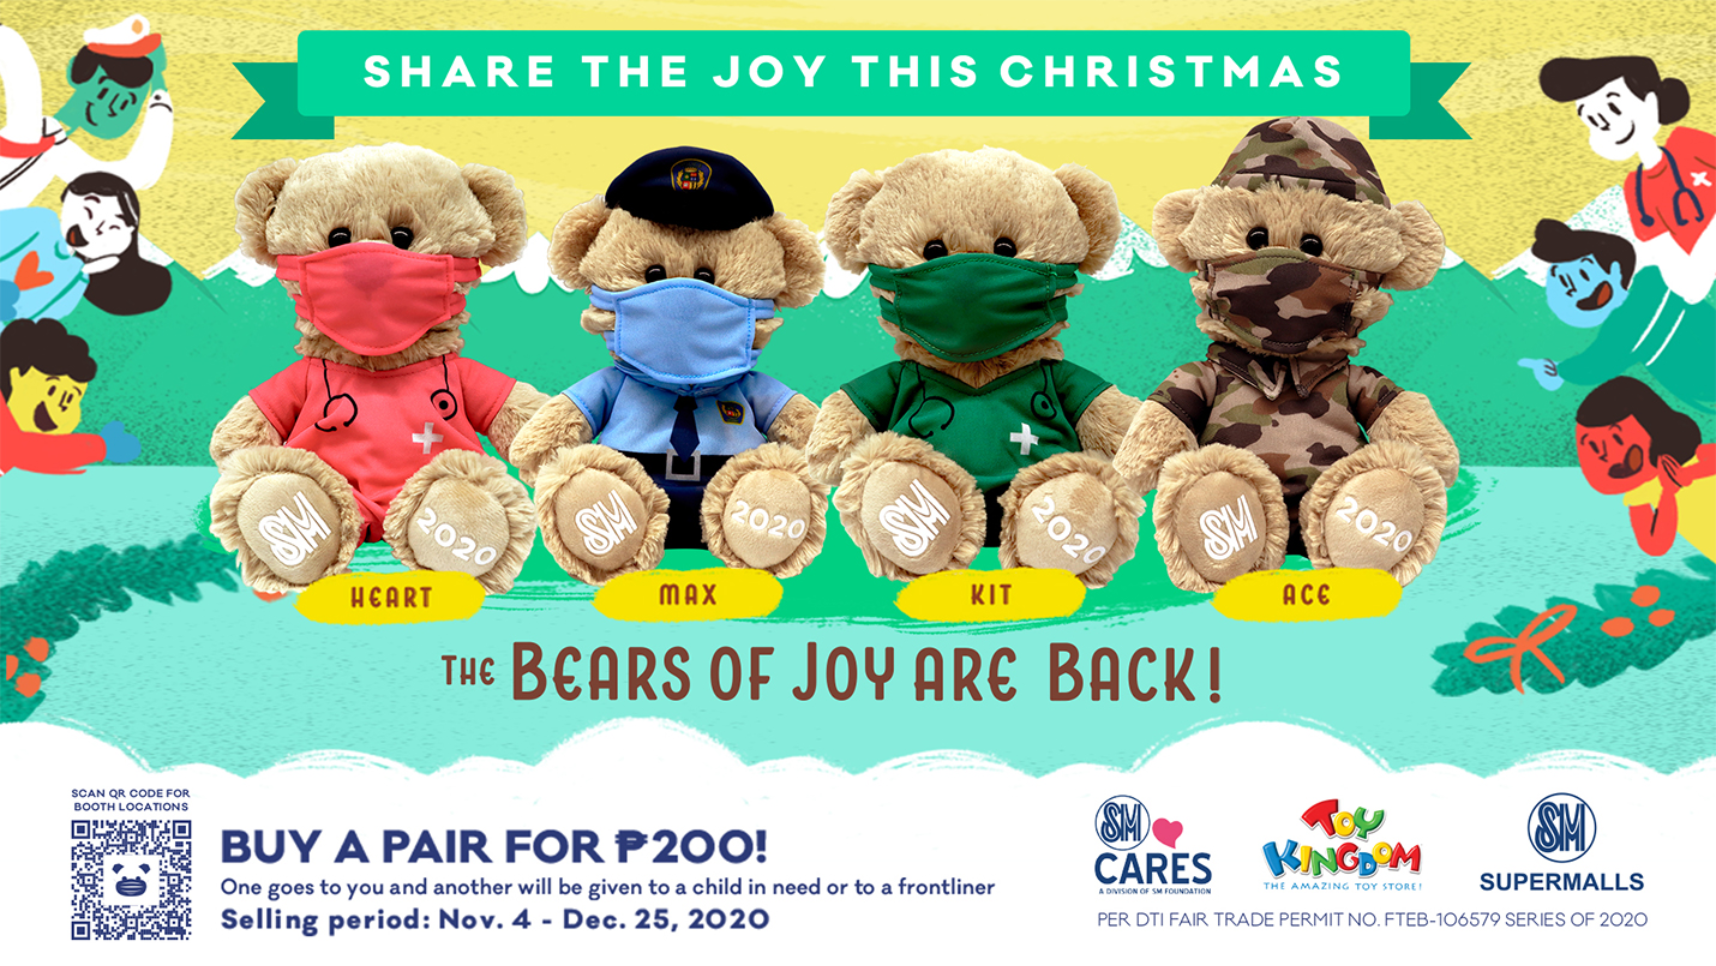 sm-cares-rolls-out-special-bears-of-joy-plushies-in-honor-of-frontliners